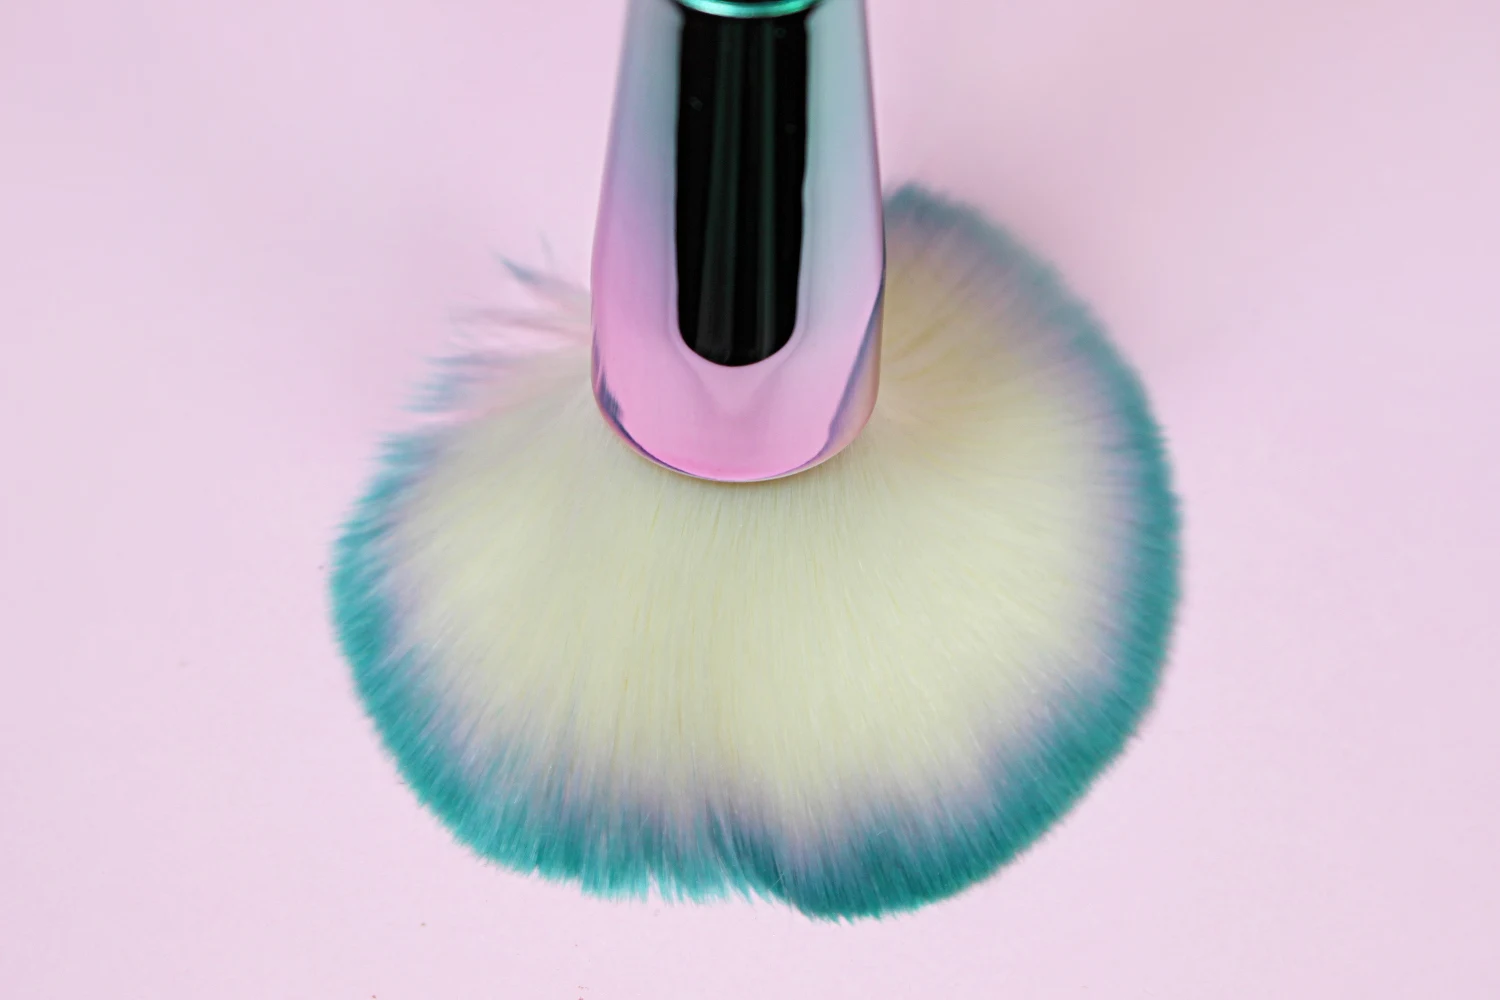 close-up of bright, iridescent makeup brushes on an eastehtic pink background